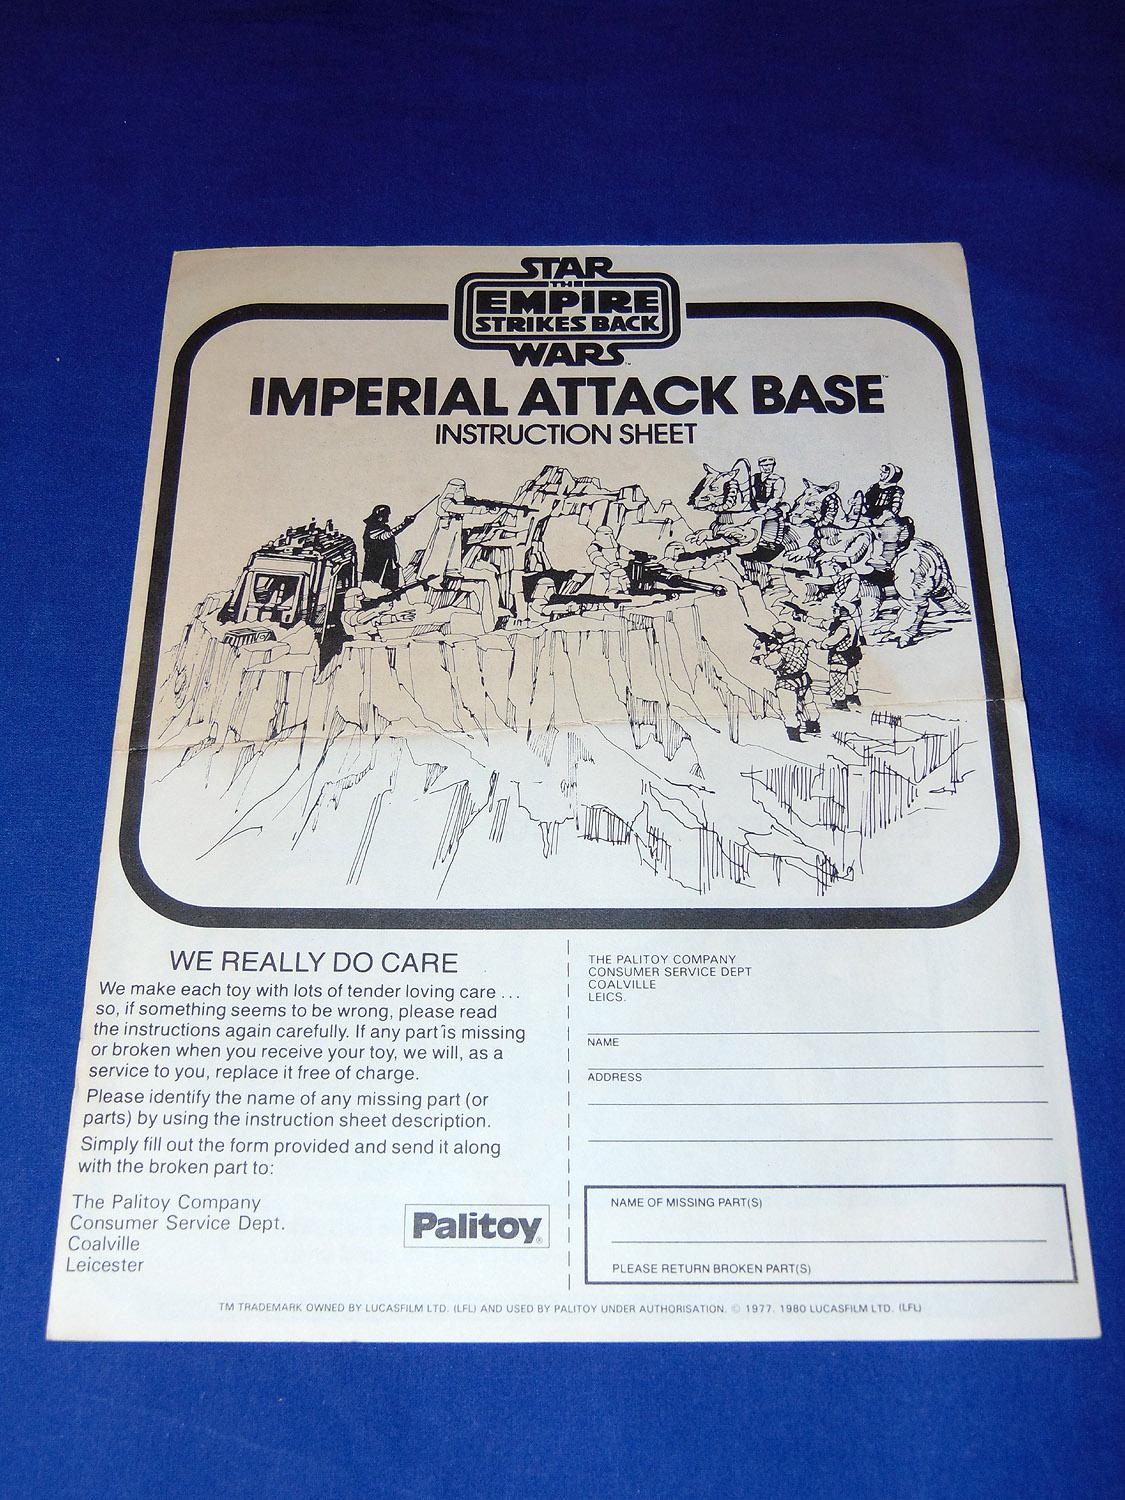 Palitoy Imperial Attack Base - 08.jpg